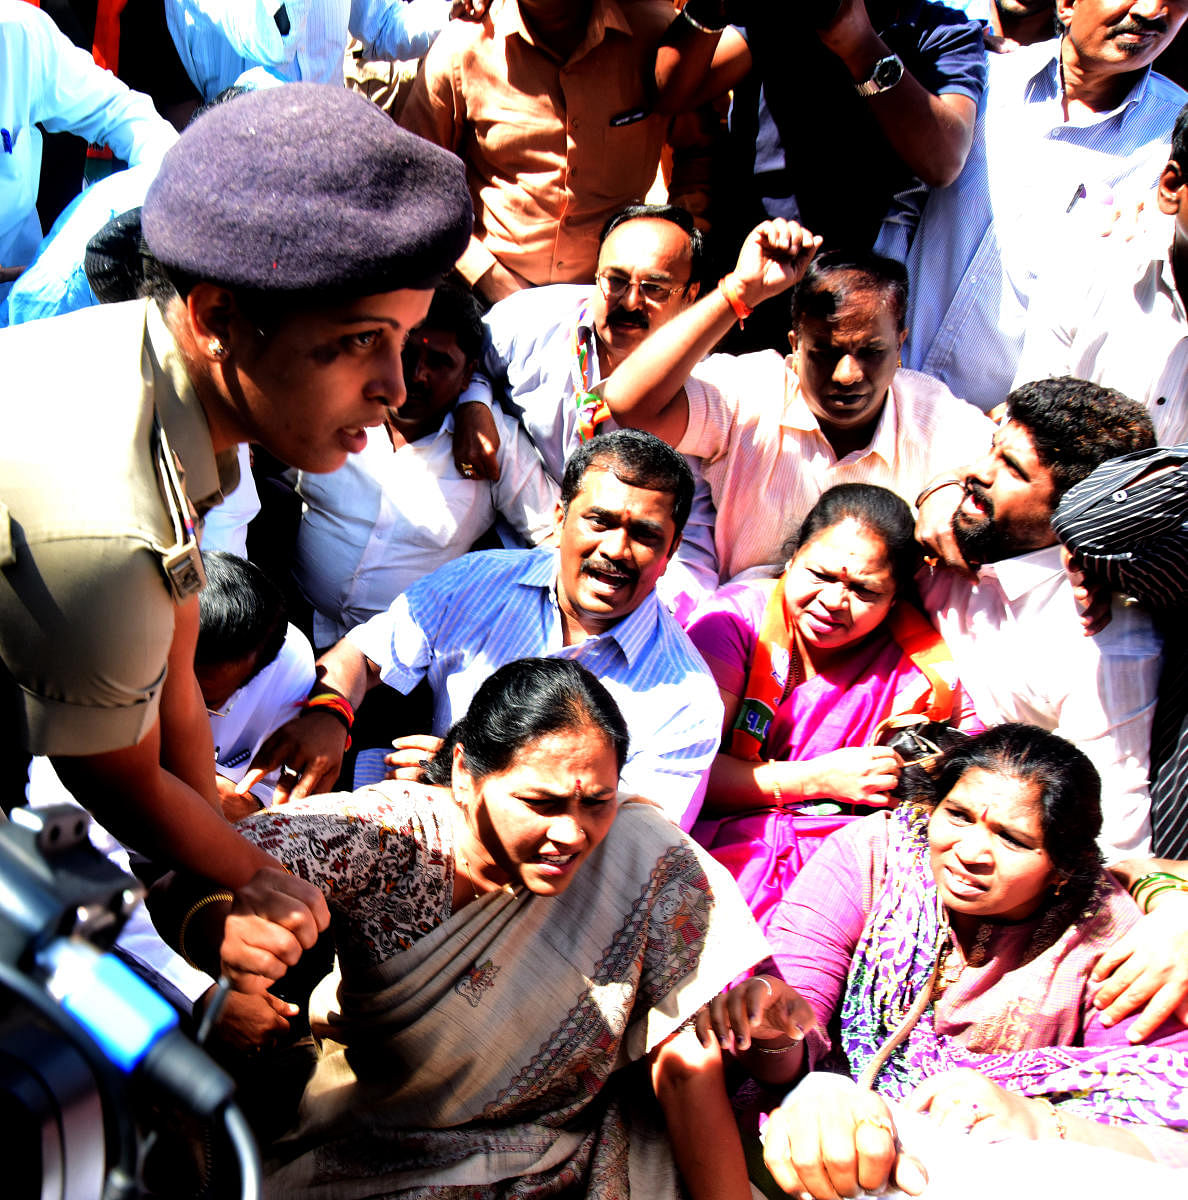 Police detain BJP leader Shobha Karandlaje during the party's protest against Chief Minister Siddarammaiah for likening BJP and RSS workers to terrorists, in Bengaluru on Saturday. DH Photo